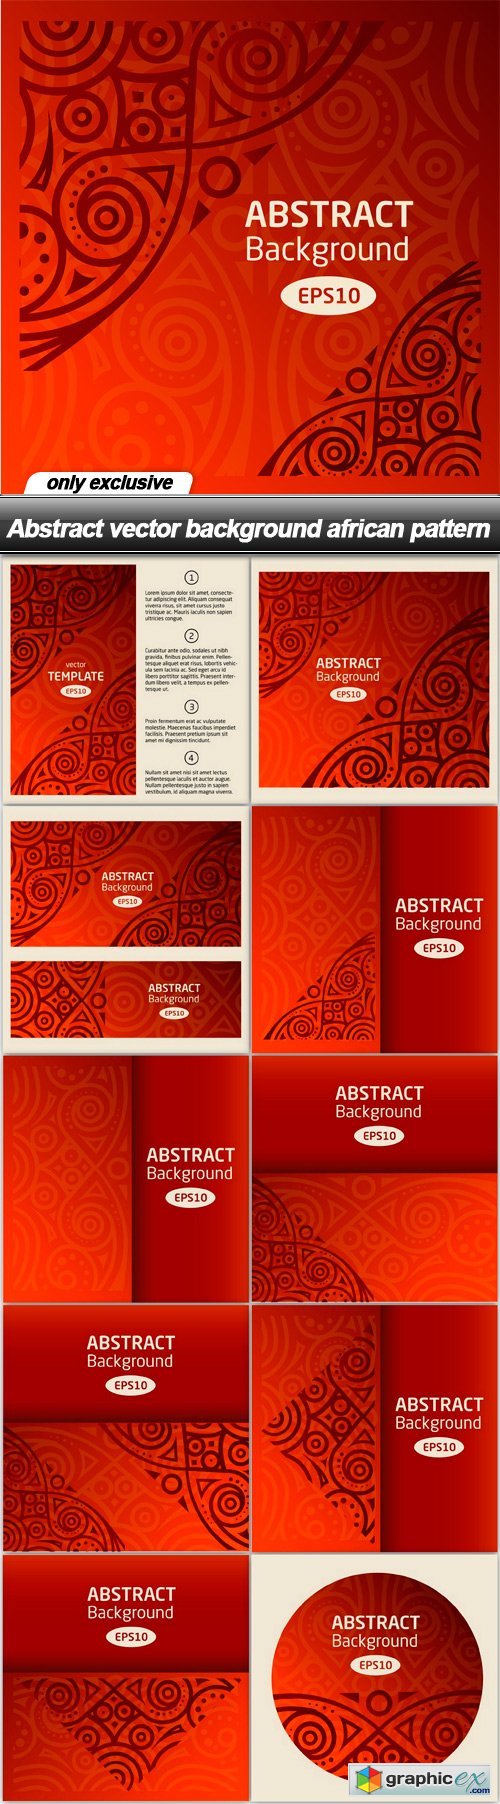 Abstract vector background african pattern - 11 EPS